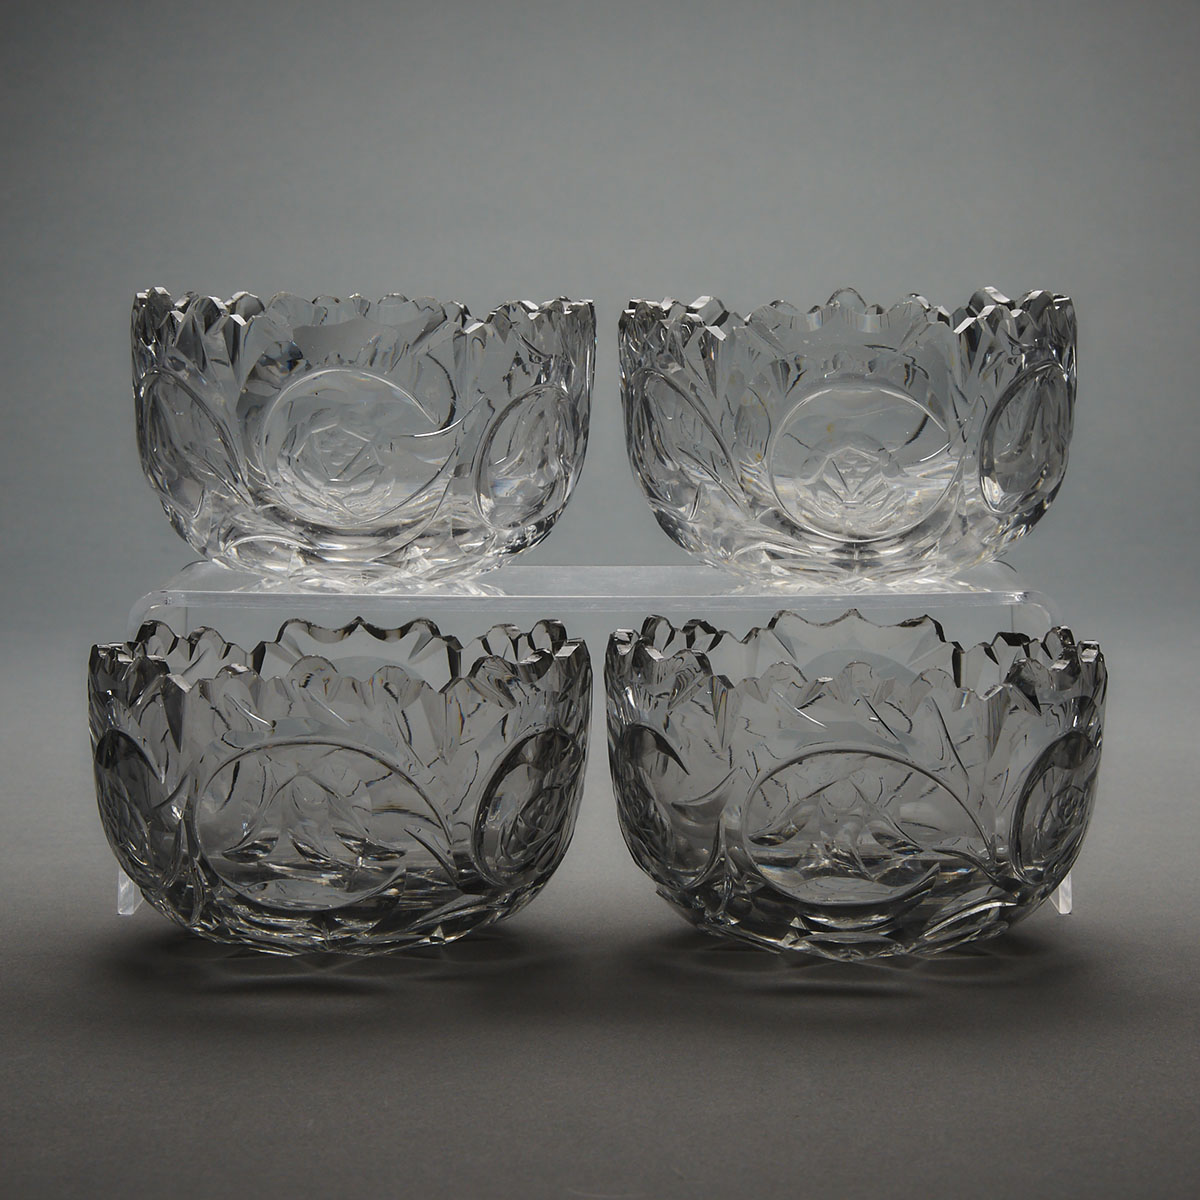 Four Anglo-Irish Cut and Moulded Glass Finger Bowls, early 19th century